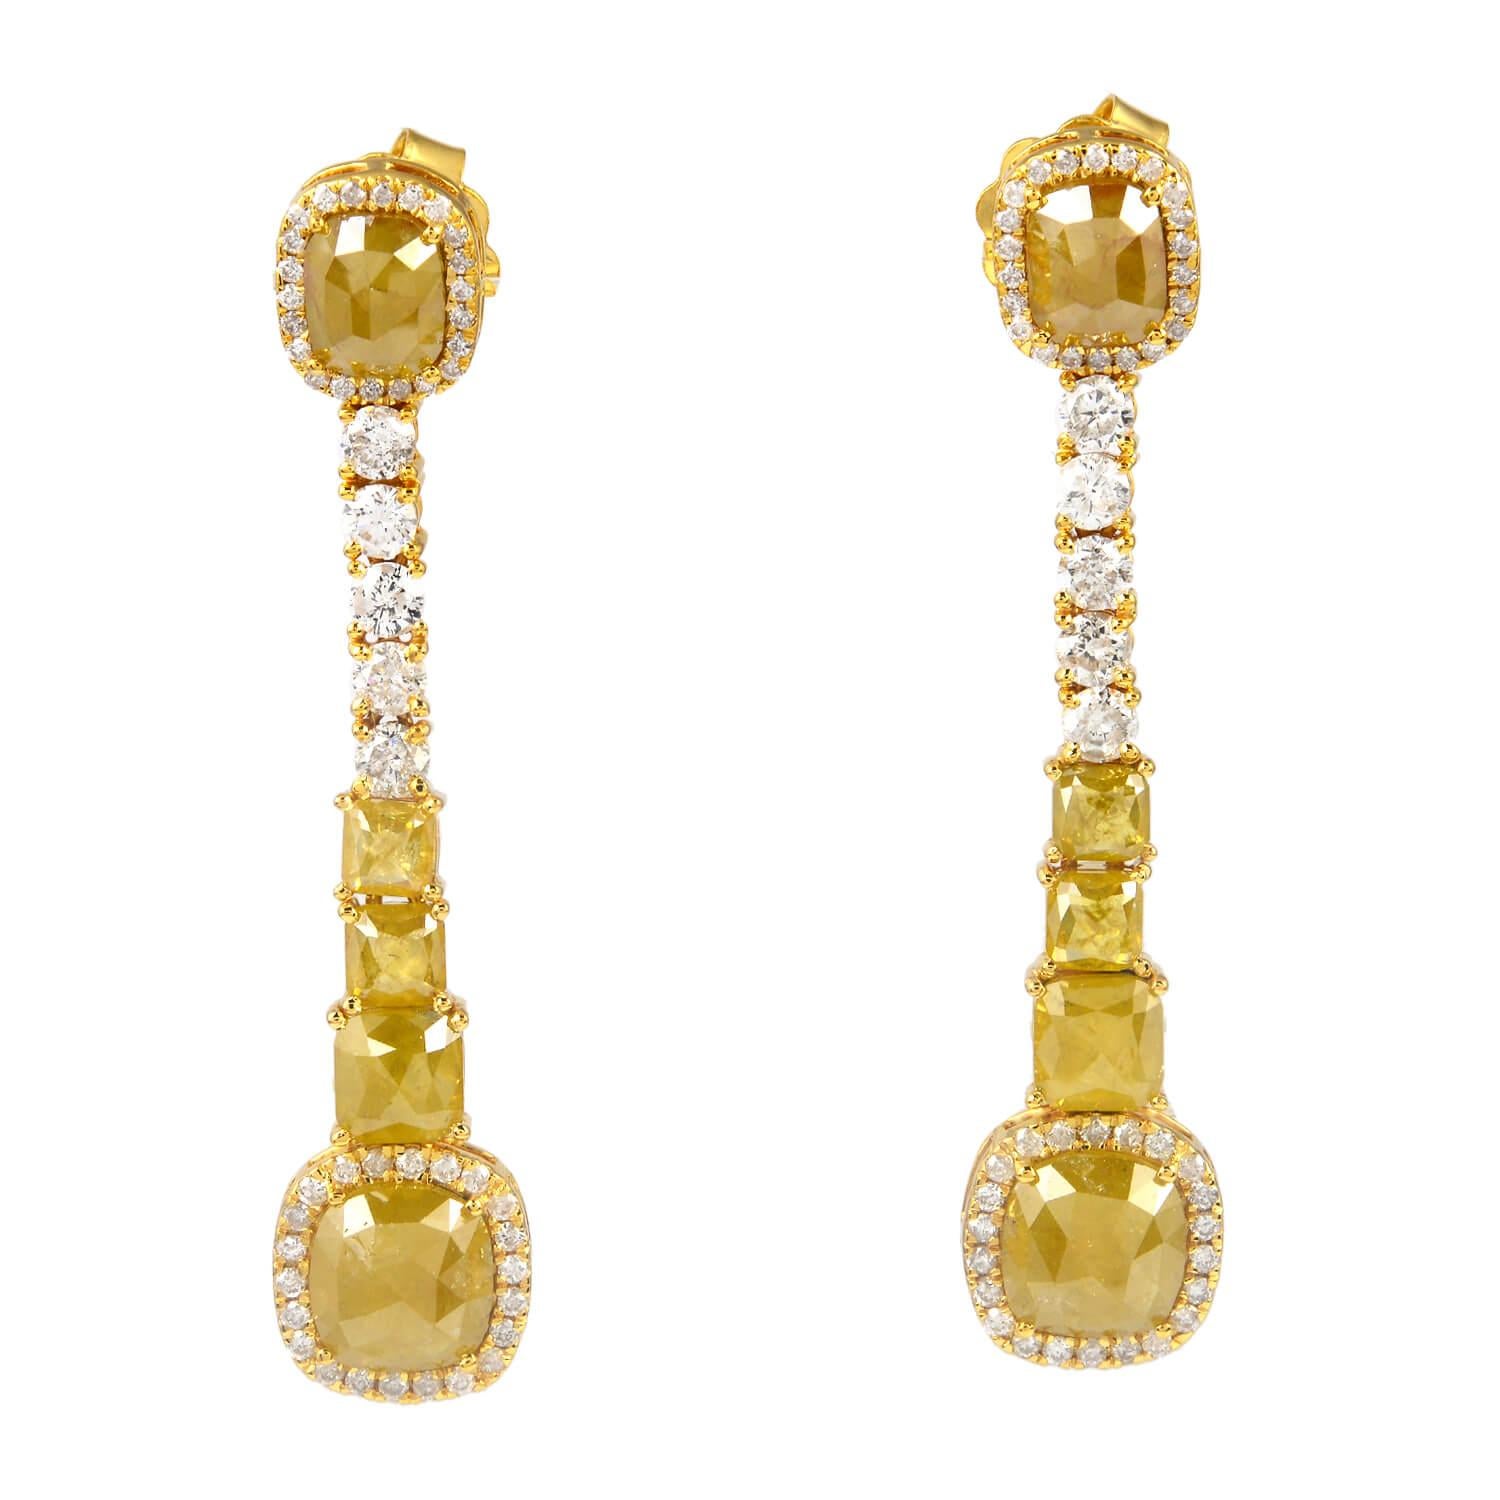 Perfect for any formal night with a golden or white gown this Fancy Yellow and White Diamond Earring in 18k yellow gold is simply lovely. 

Earring Closure: Push Post

18K: 8.33gms
Diamond: 10.1cts

